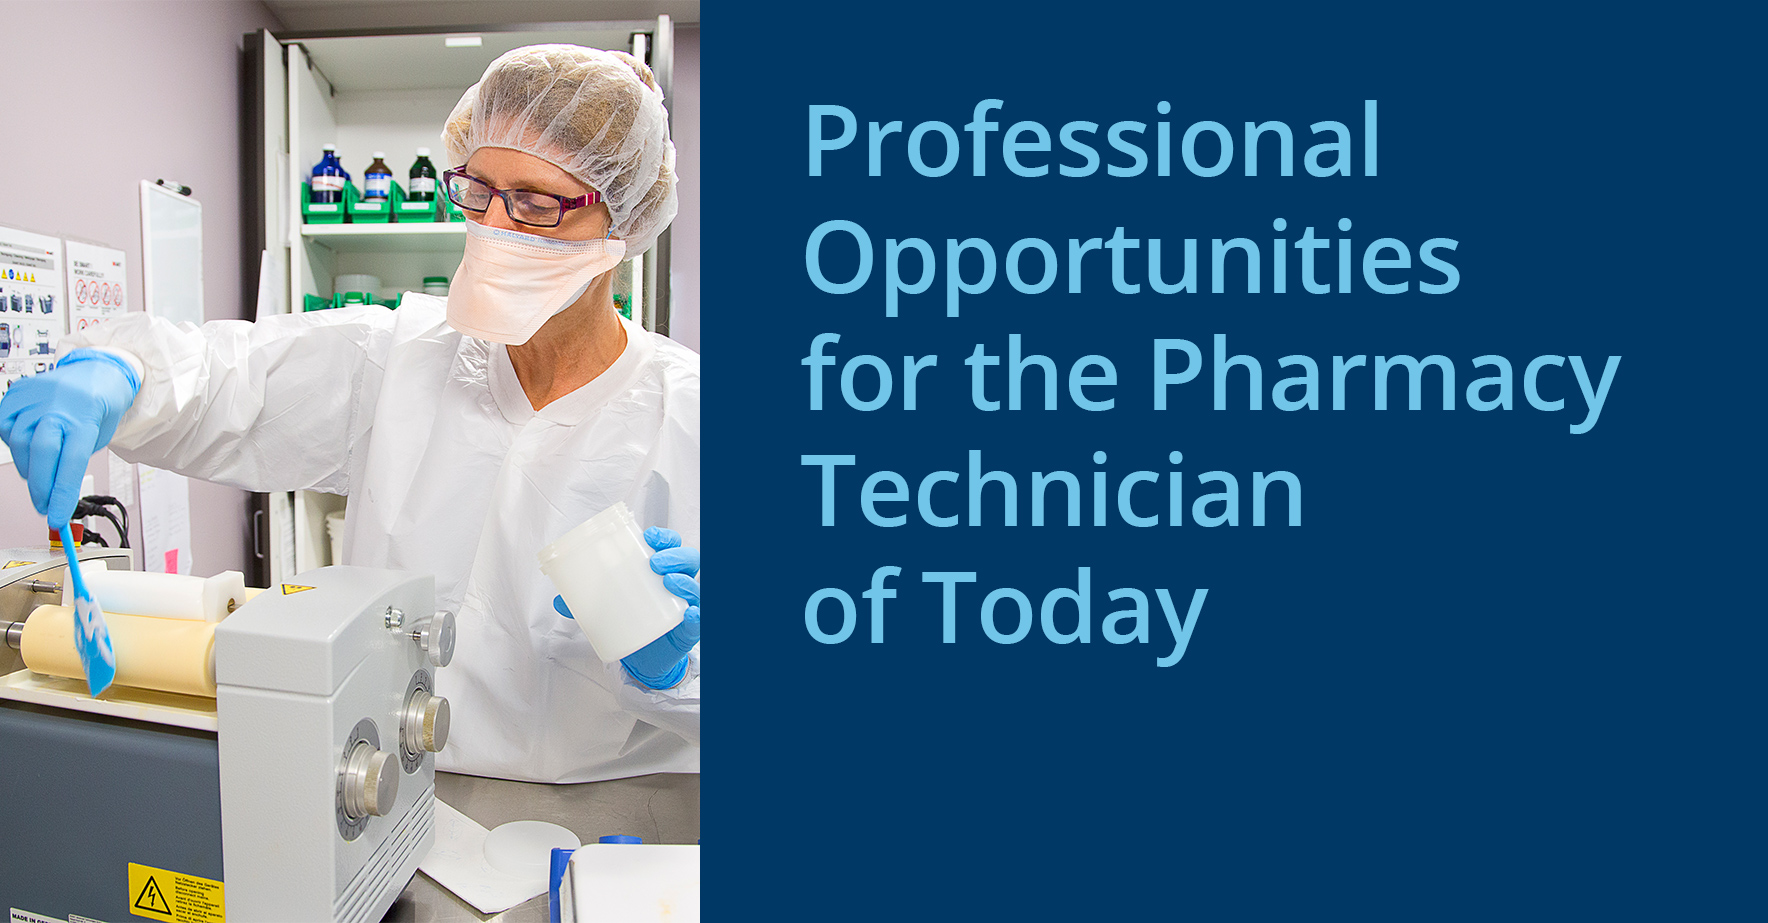 profession_opportunities_for_the_pharmacy_technician_of_today.jpg.